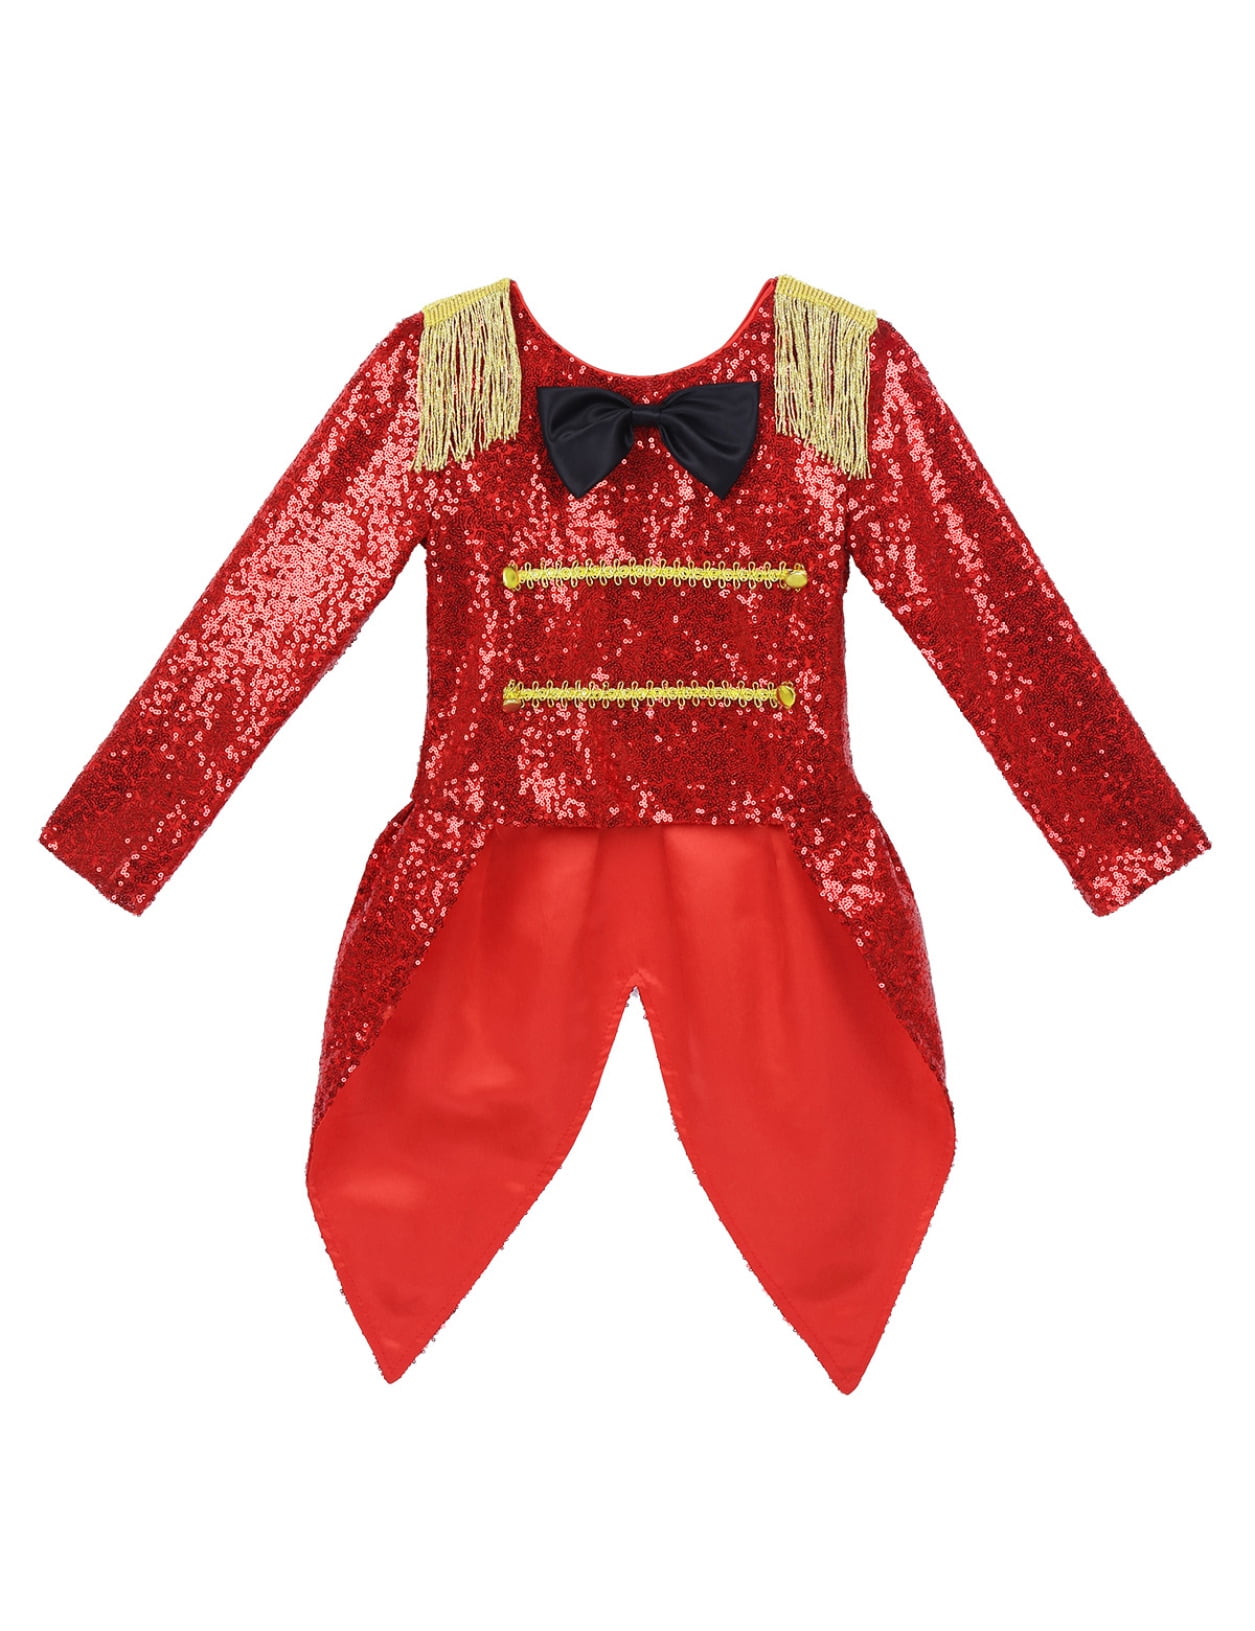 The  Greatest Showman Ring Master Ice Dancing Skater Costume Age 5-6 size 24" 